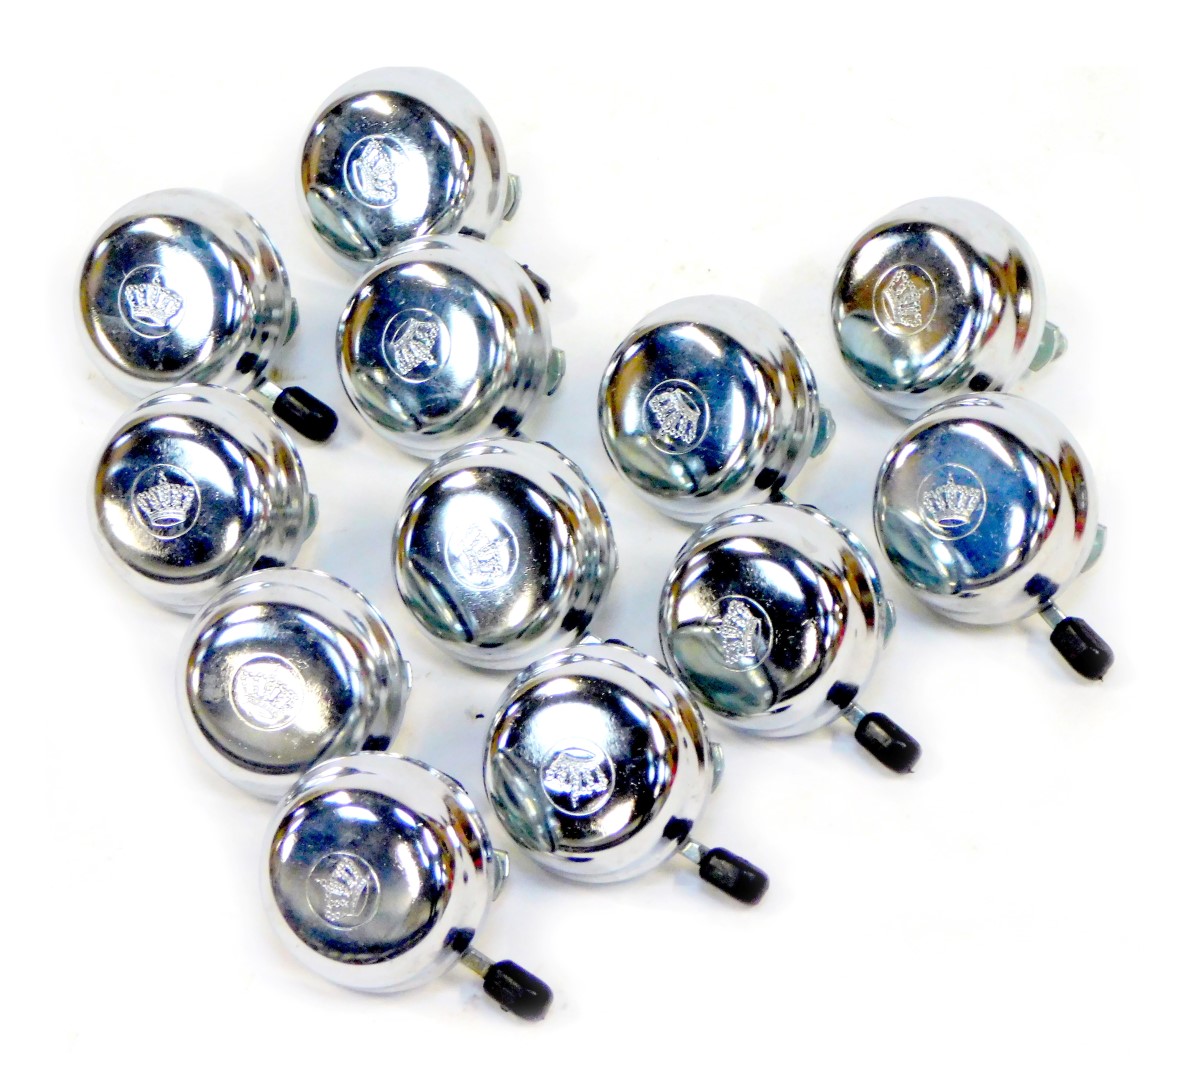 A group of Widek bicycle bells, each stainless steel with crown emblem. (1 tray)